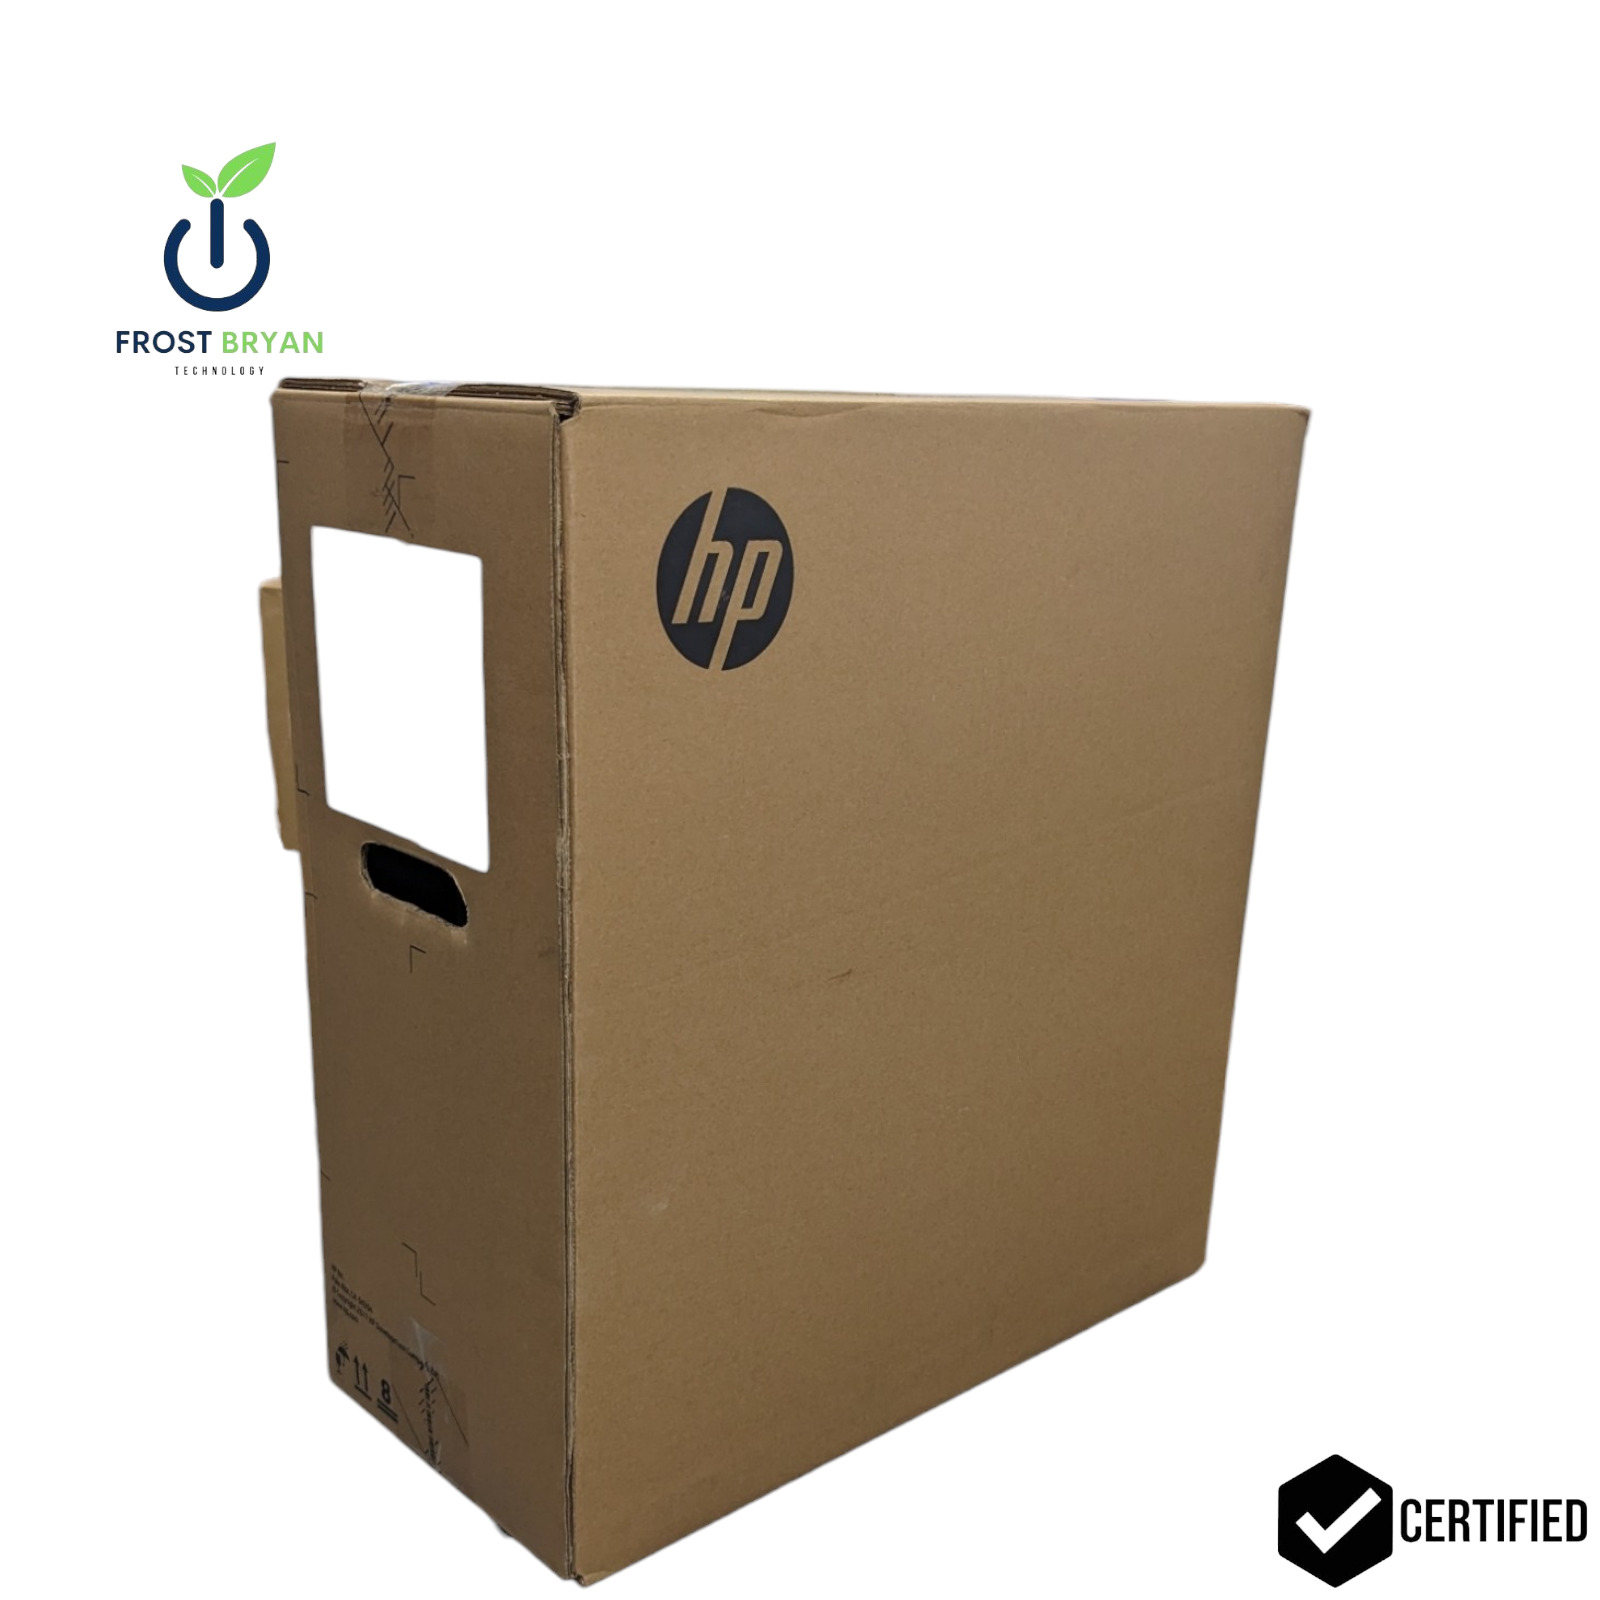 OPEN BOX HP Retail System RP5810 I5-4570s@2.9GHz, 8GB RAM, 500 GB HDD, NO OS